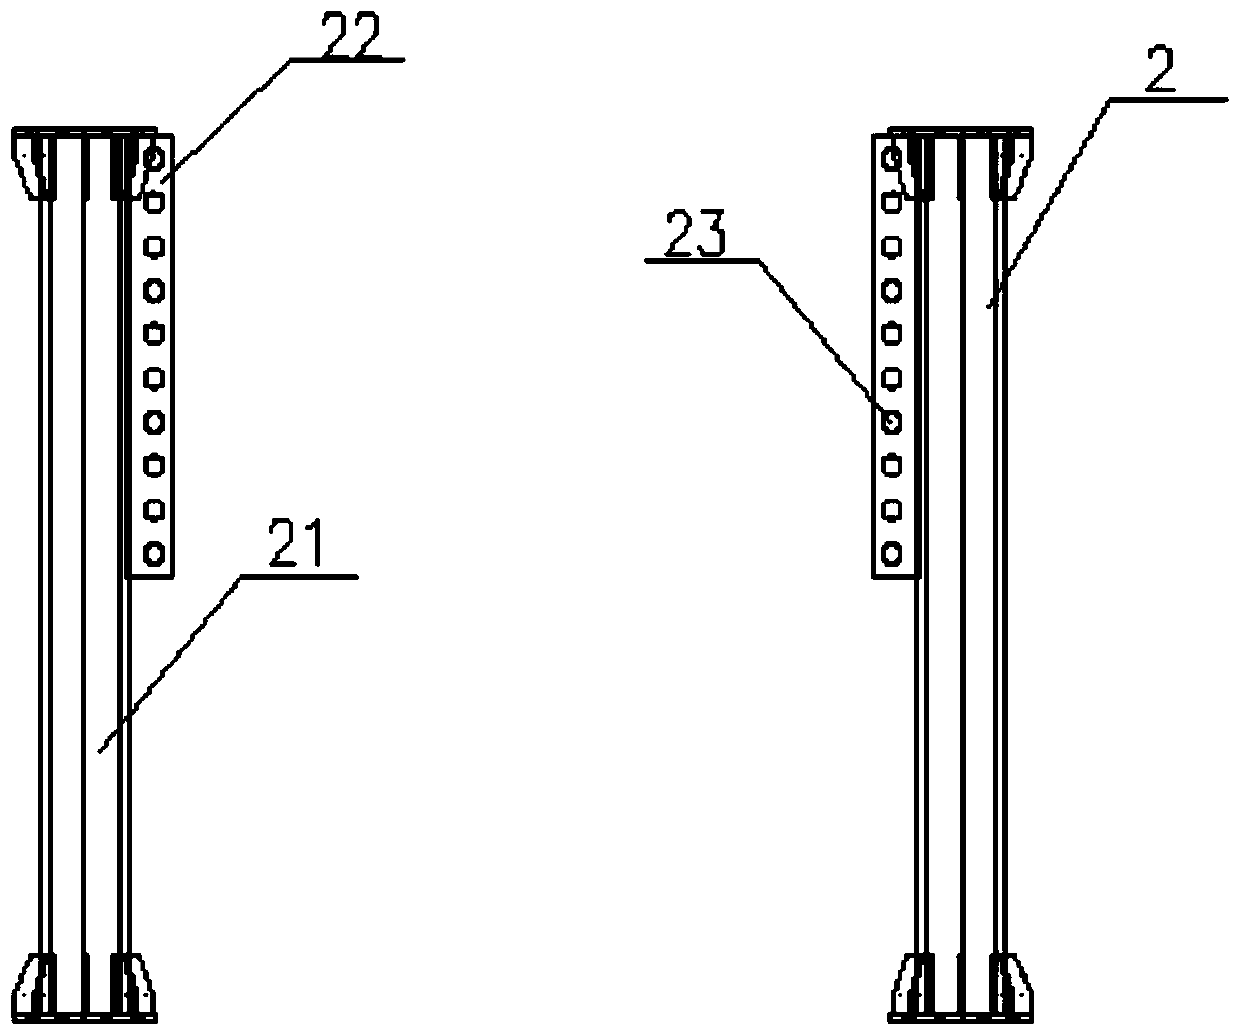 A highway height limit gantry and its height limit adjustment method